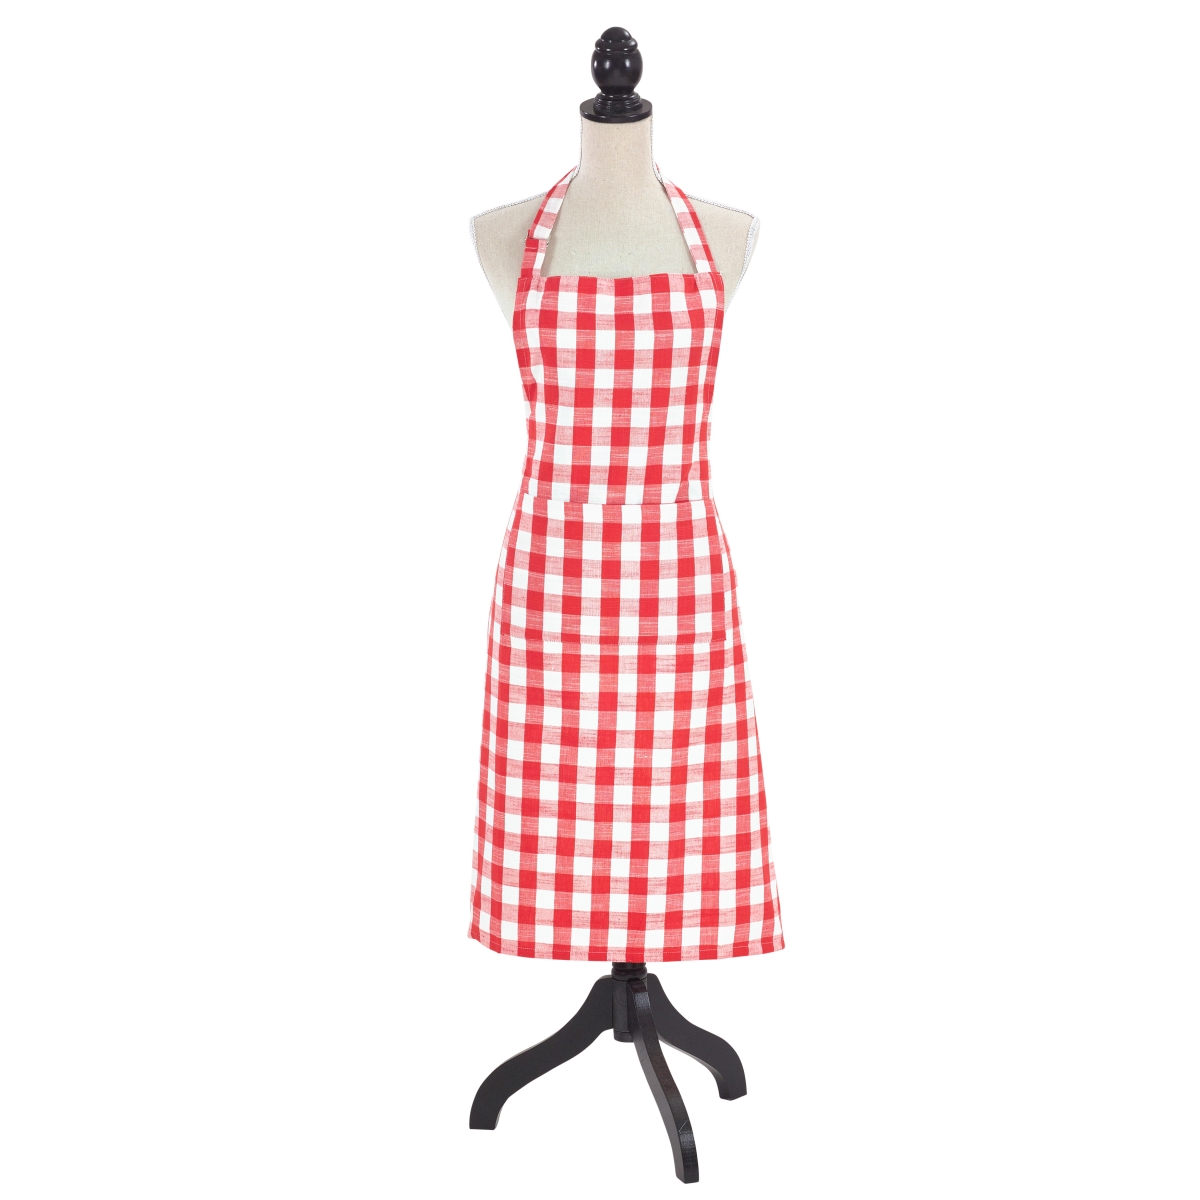 1029.r2436 24 X 36 In. Cotton Apron With Gingham Design, Red